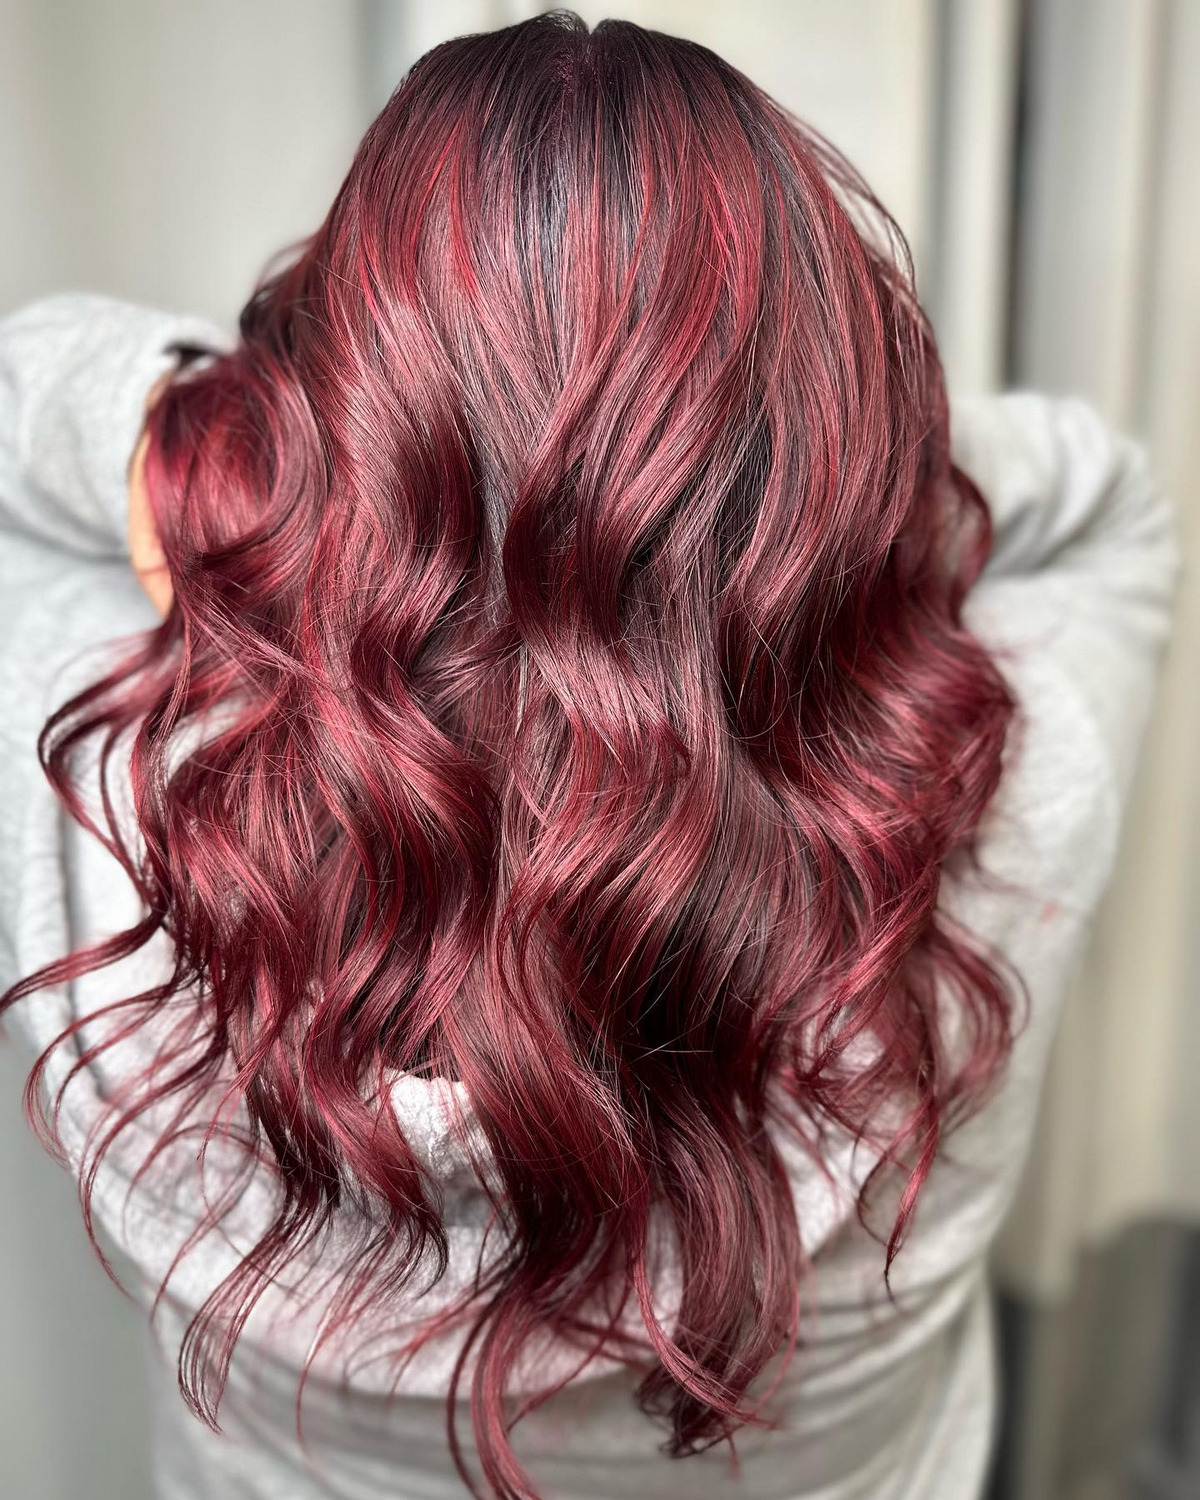 35 Hair Color Trends & Ideas That Will Dominate in 2023 - Hood MWR